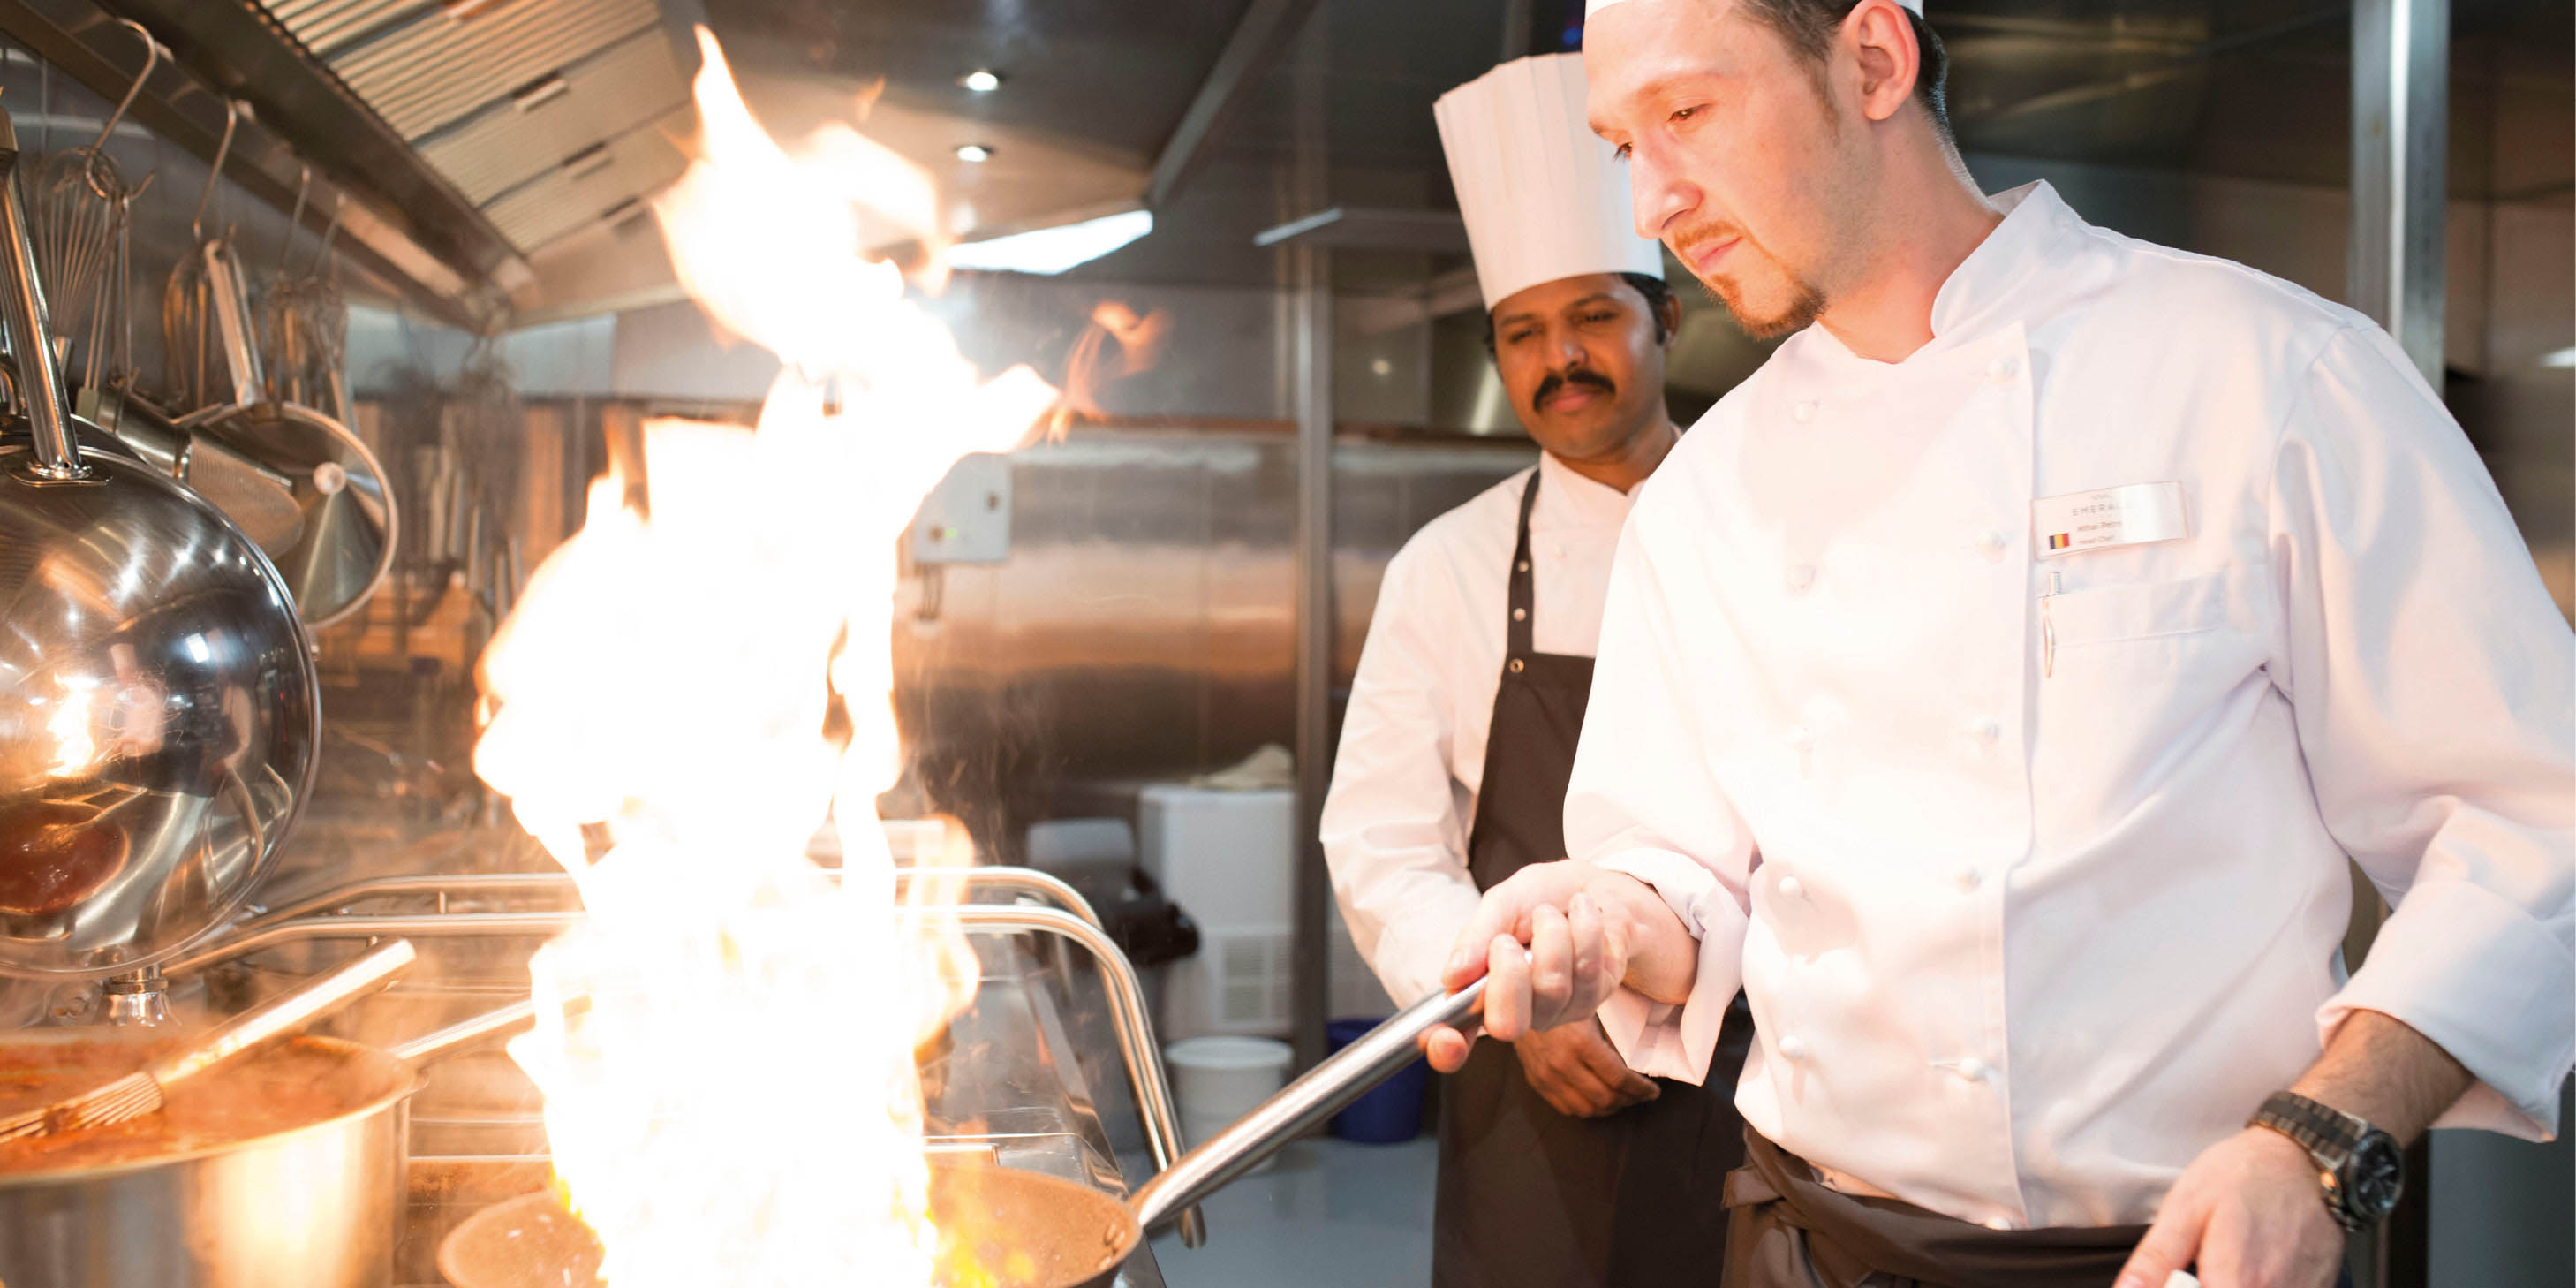 Two chefs preparing a delicious meal for guests on board a luxury river ship in Europe